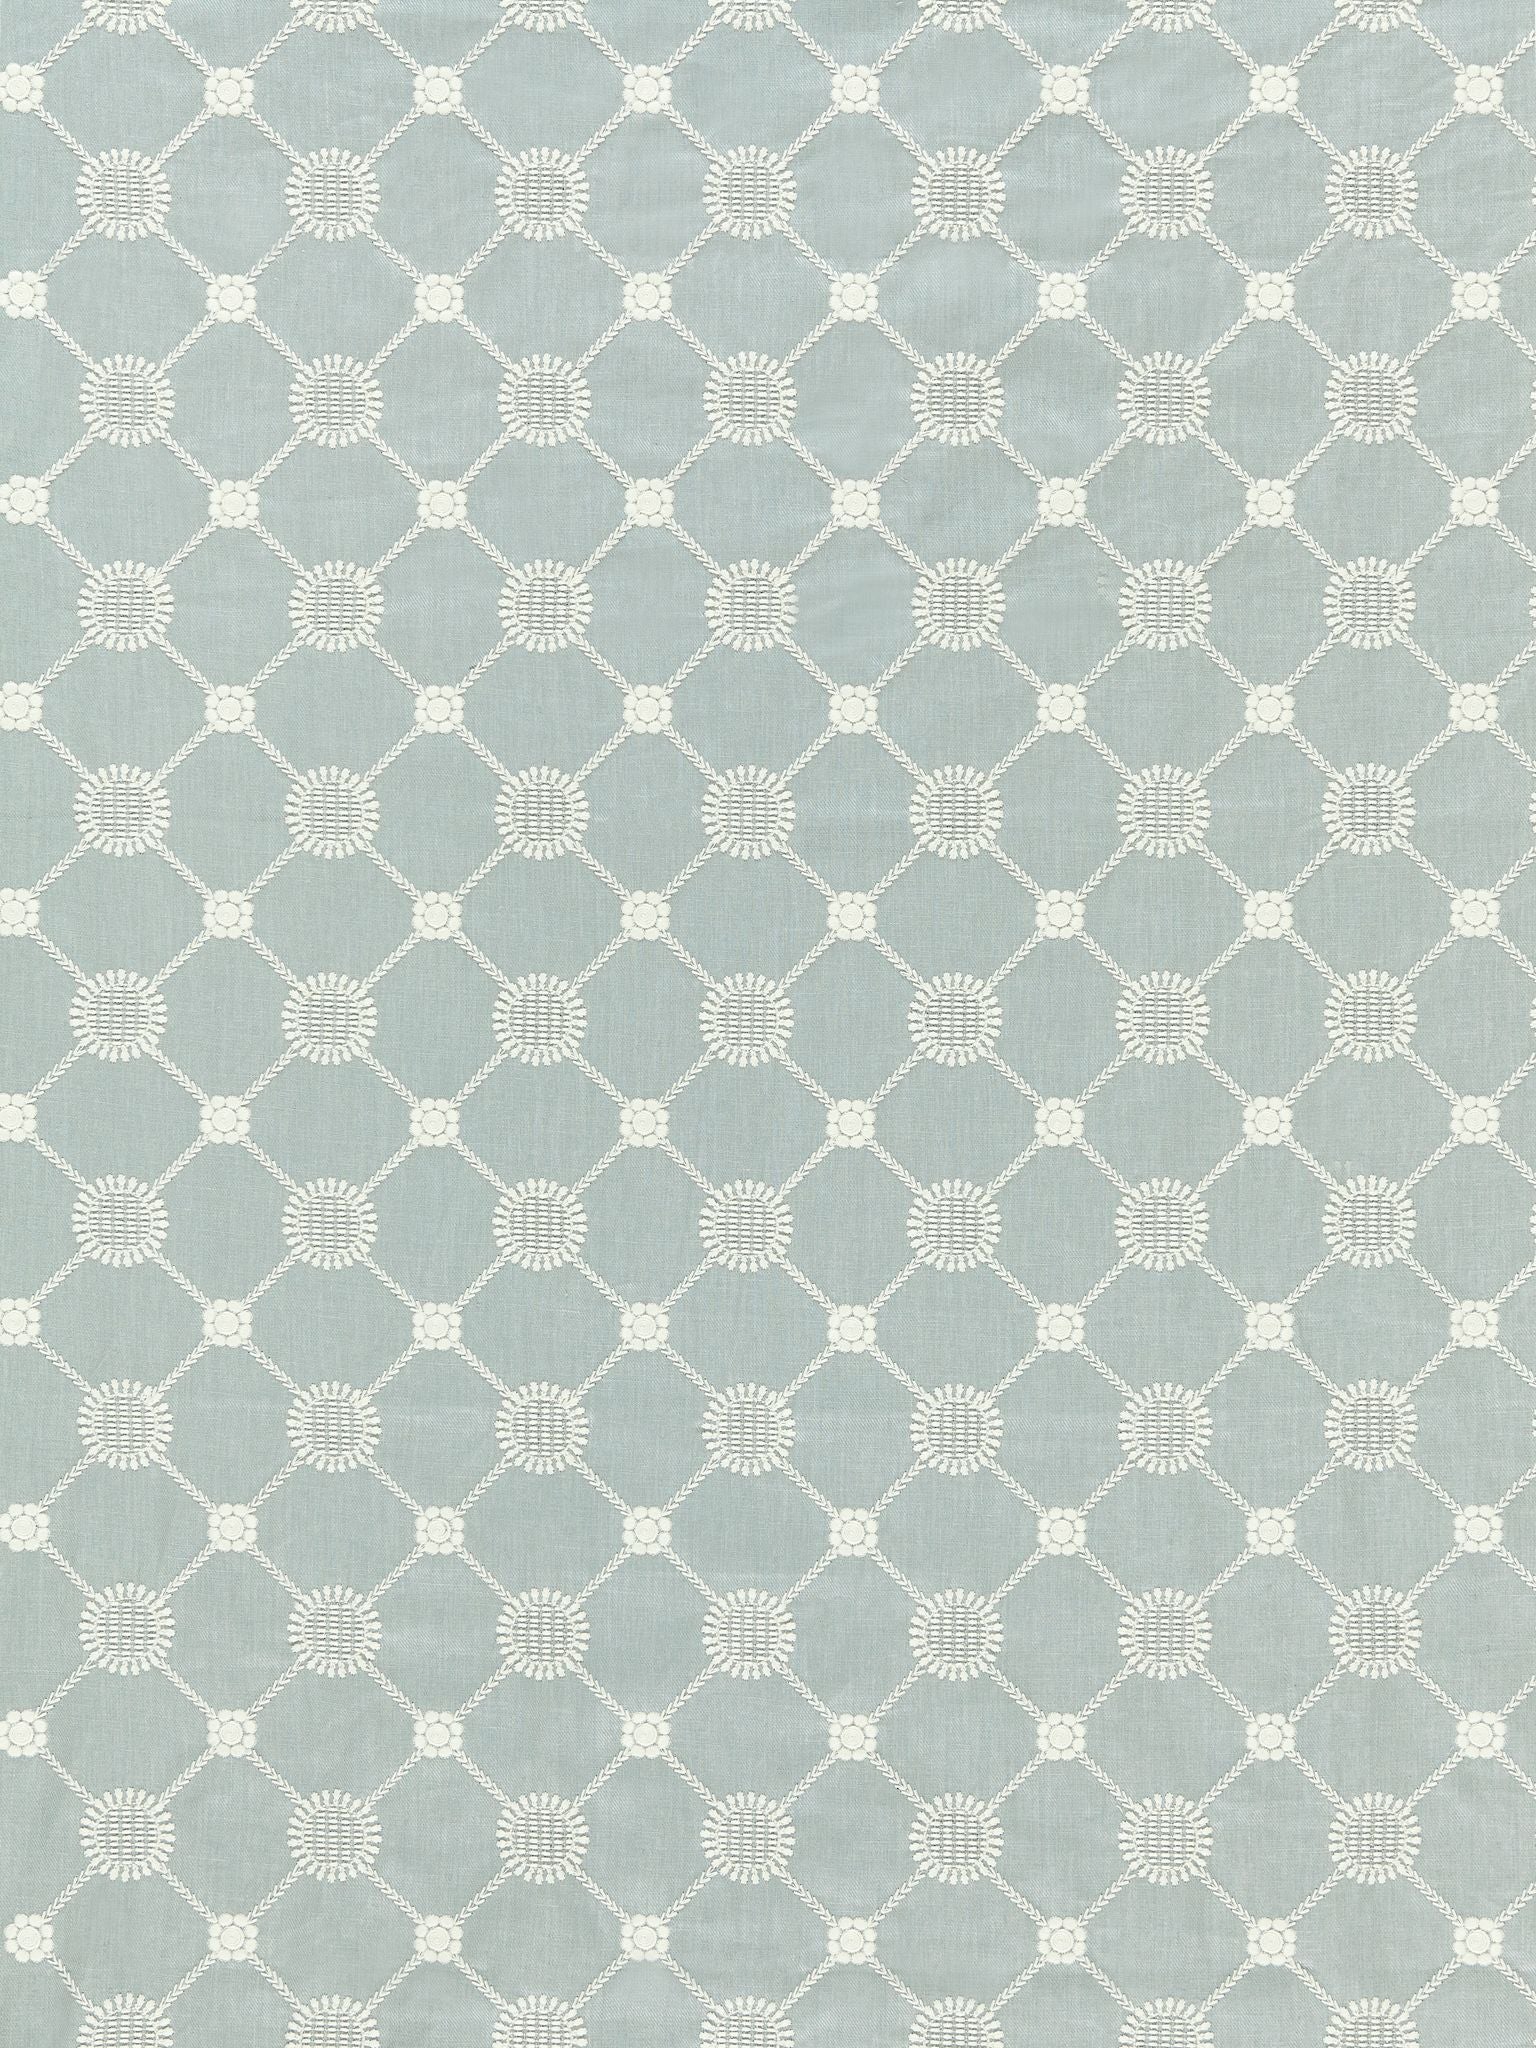 Gustavian Diamond fabric in skylight color - pattern number SC 000227161 - by Scalamandre in the Scalamandre Fabrics Book 1 collection